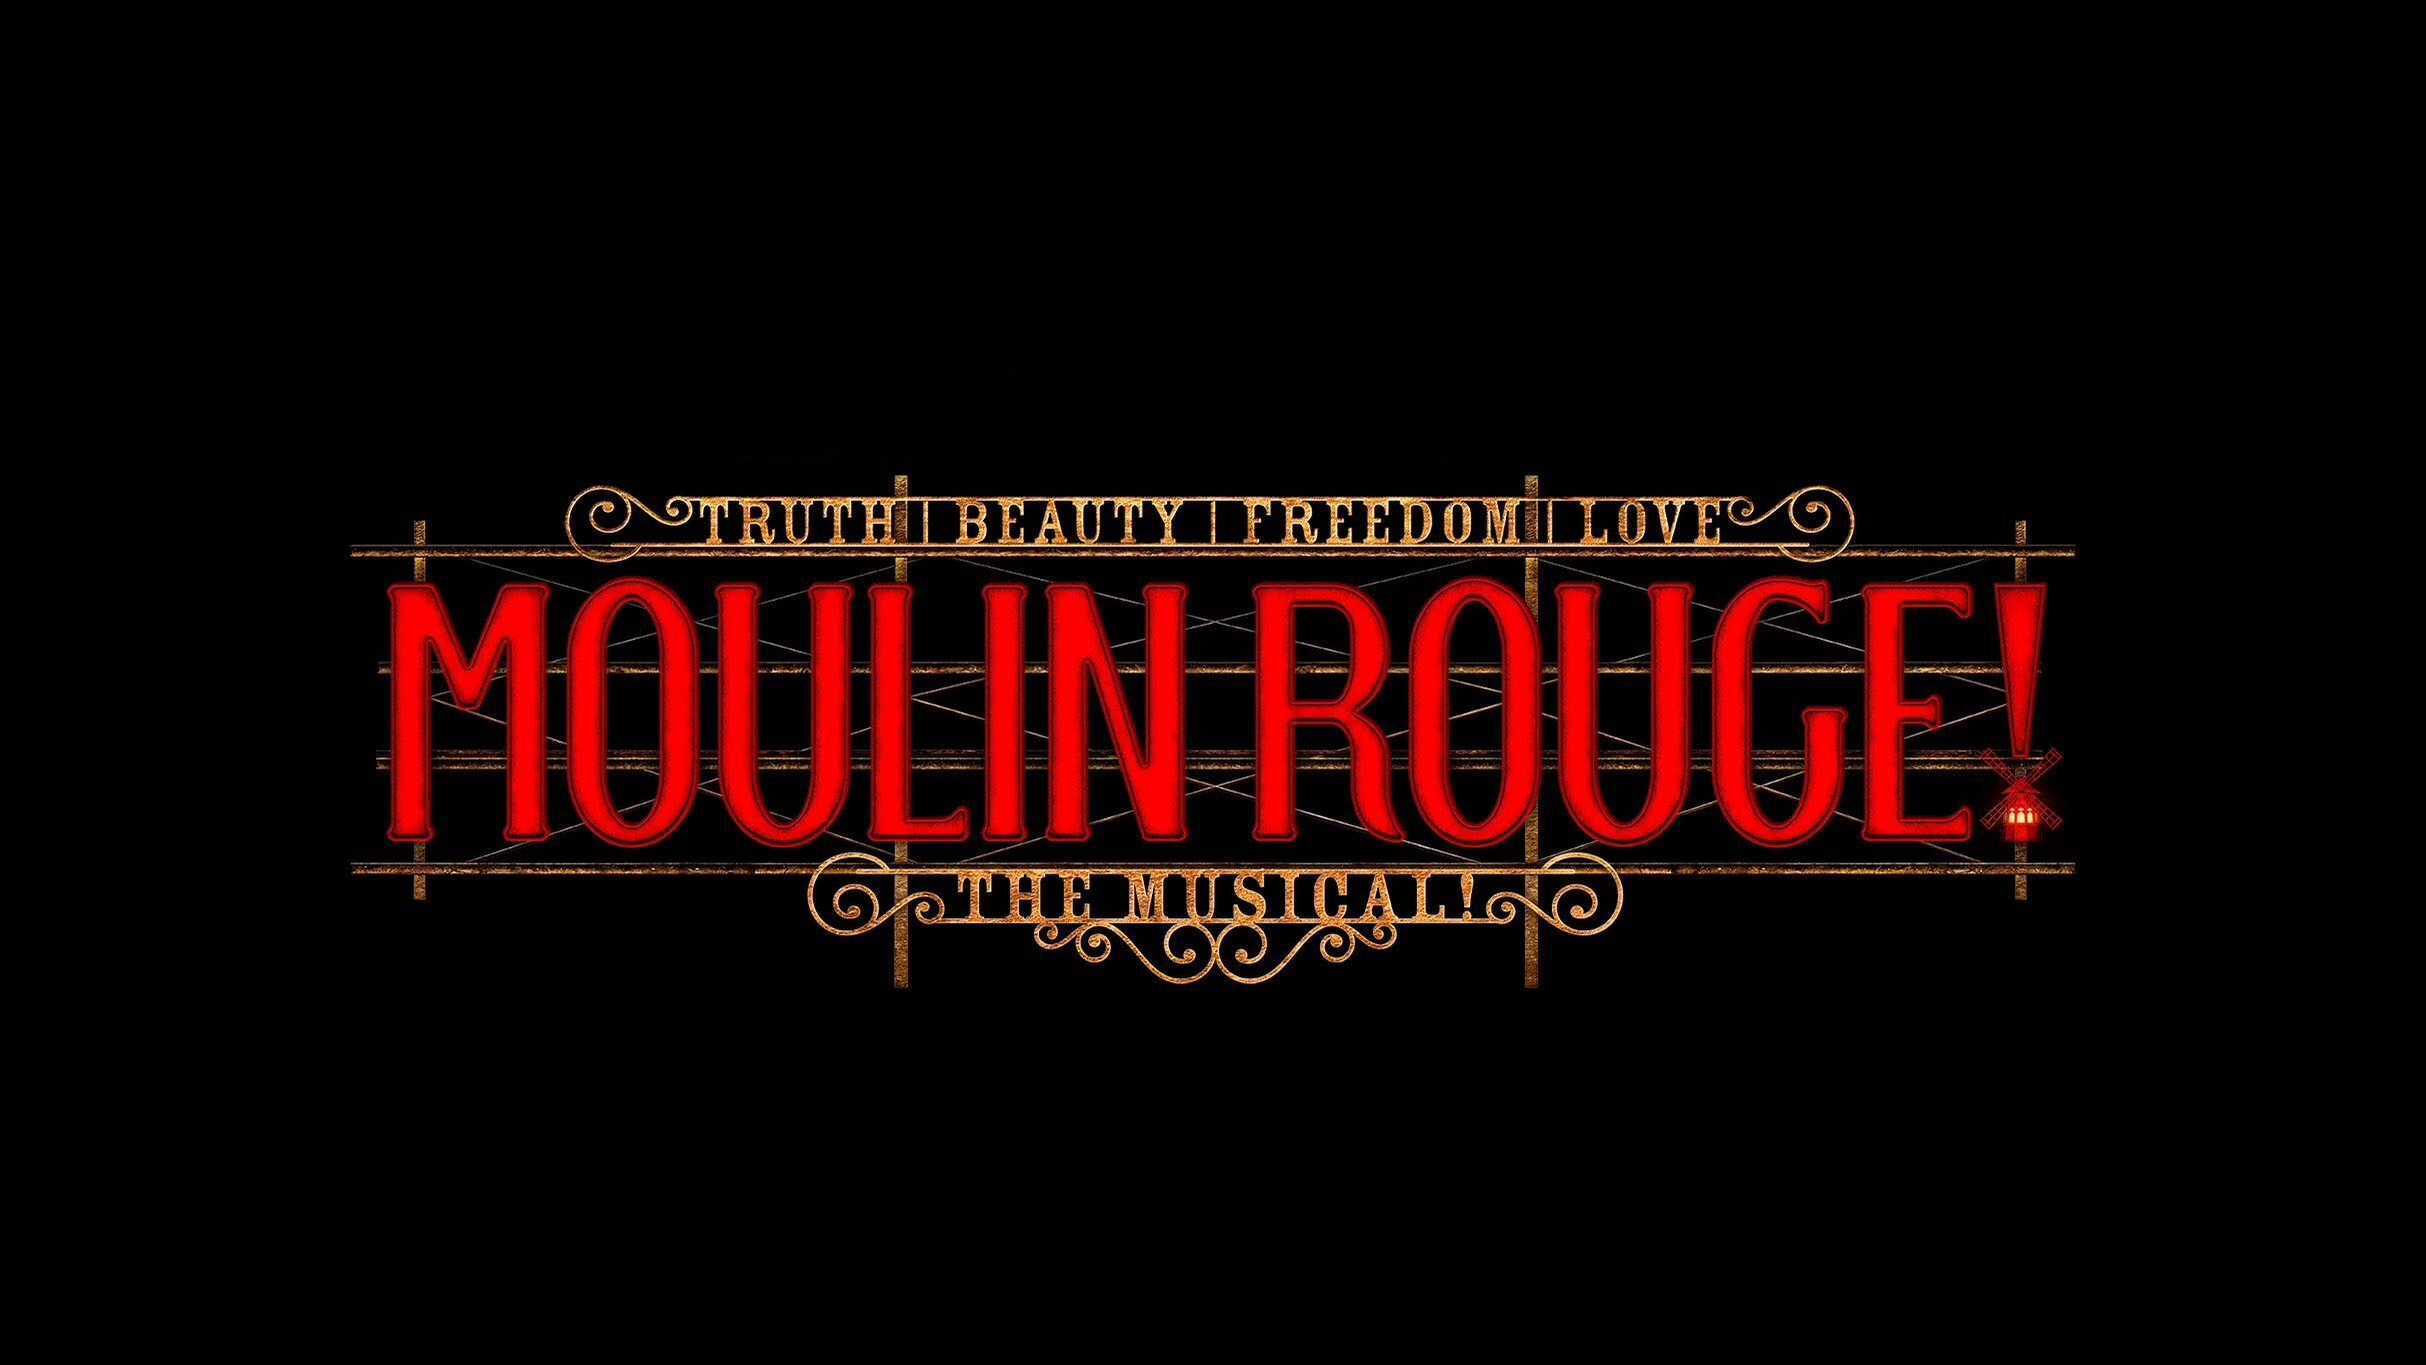 Moulin Rouge (Touring) in Kansas City promo photo for Exclusive presale offer code